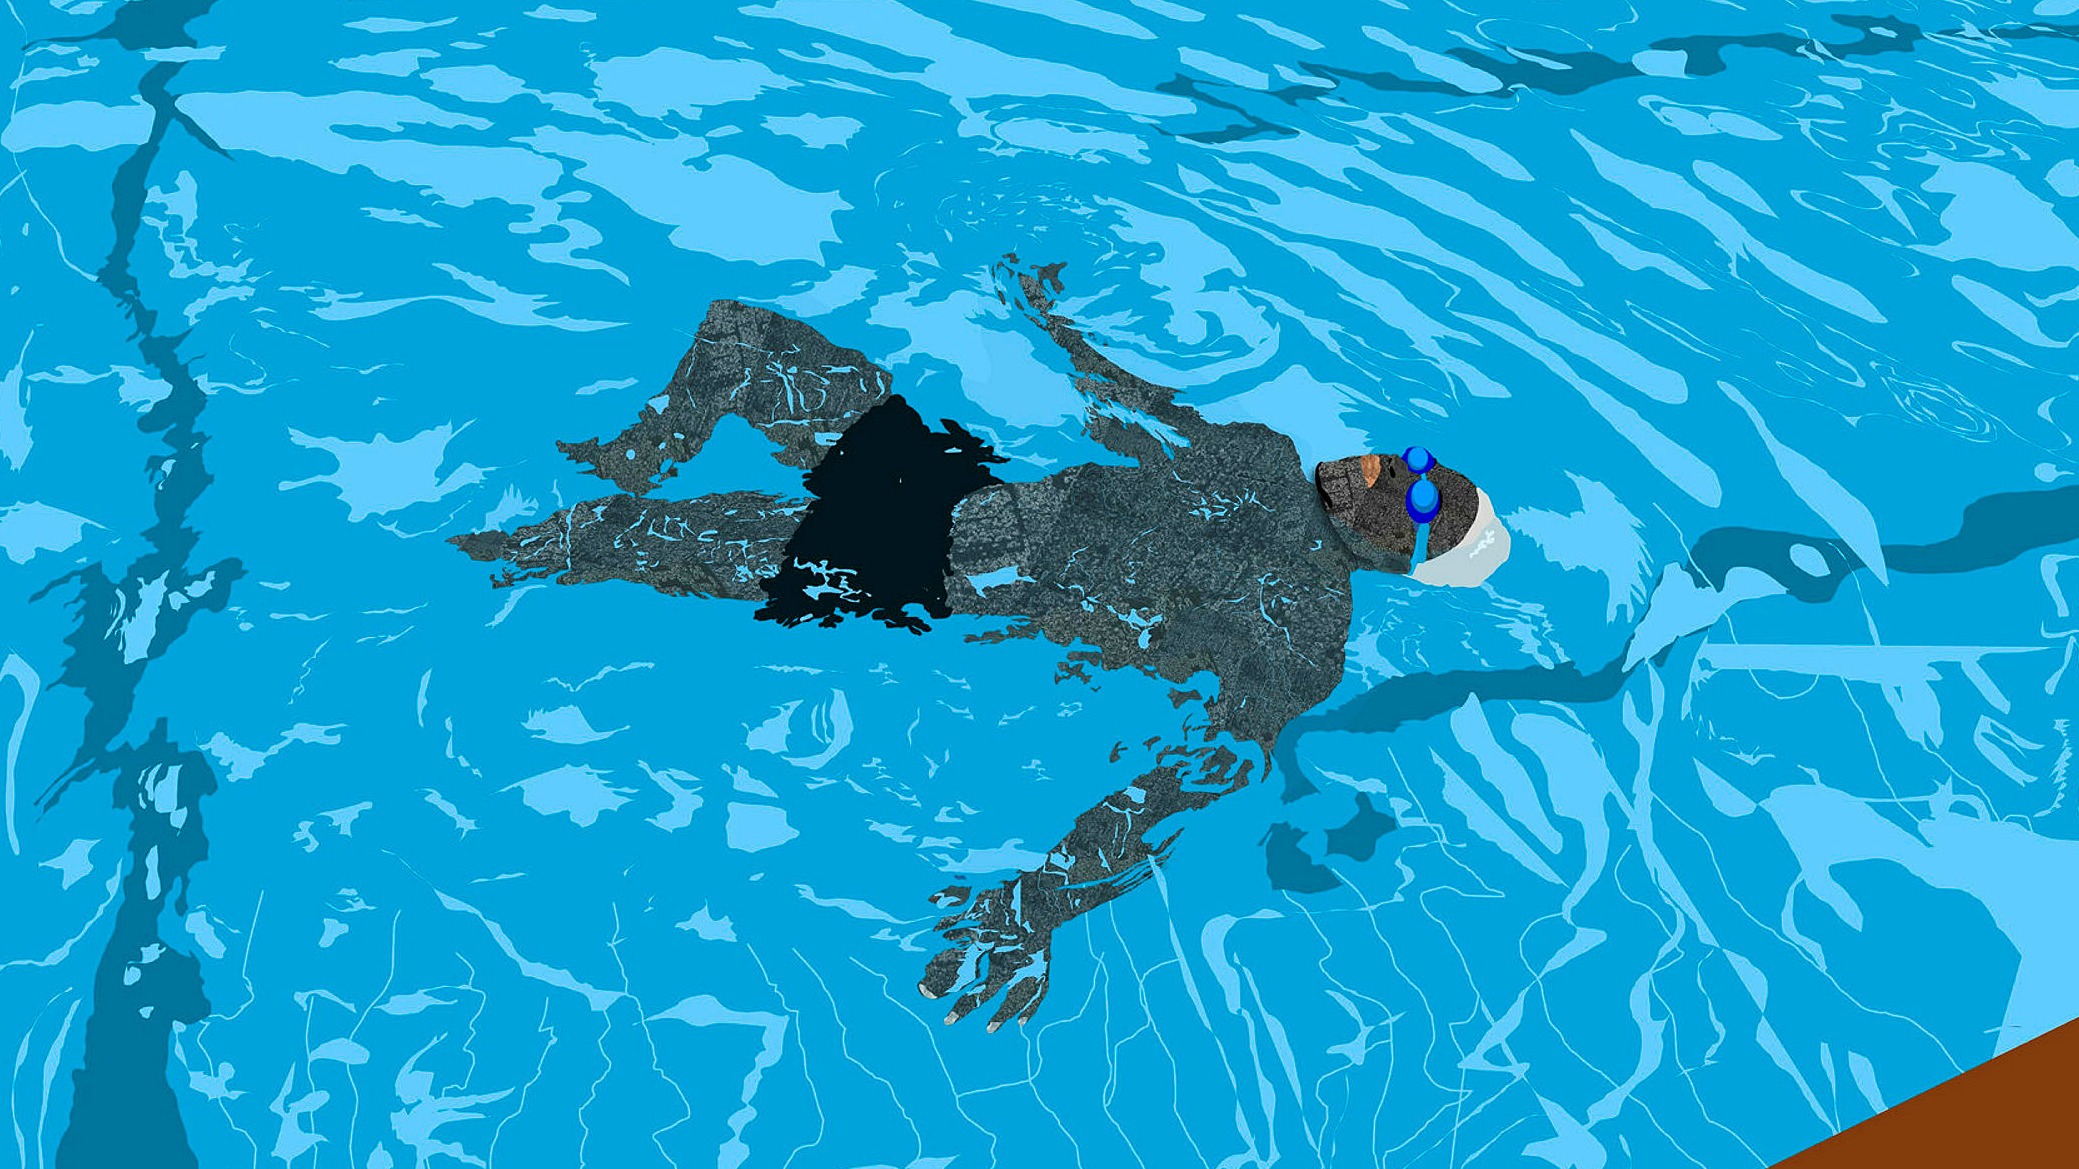 Osinachi’s ‘Man in a Pool III’ (2021) © Christie’s Images